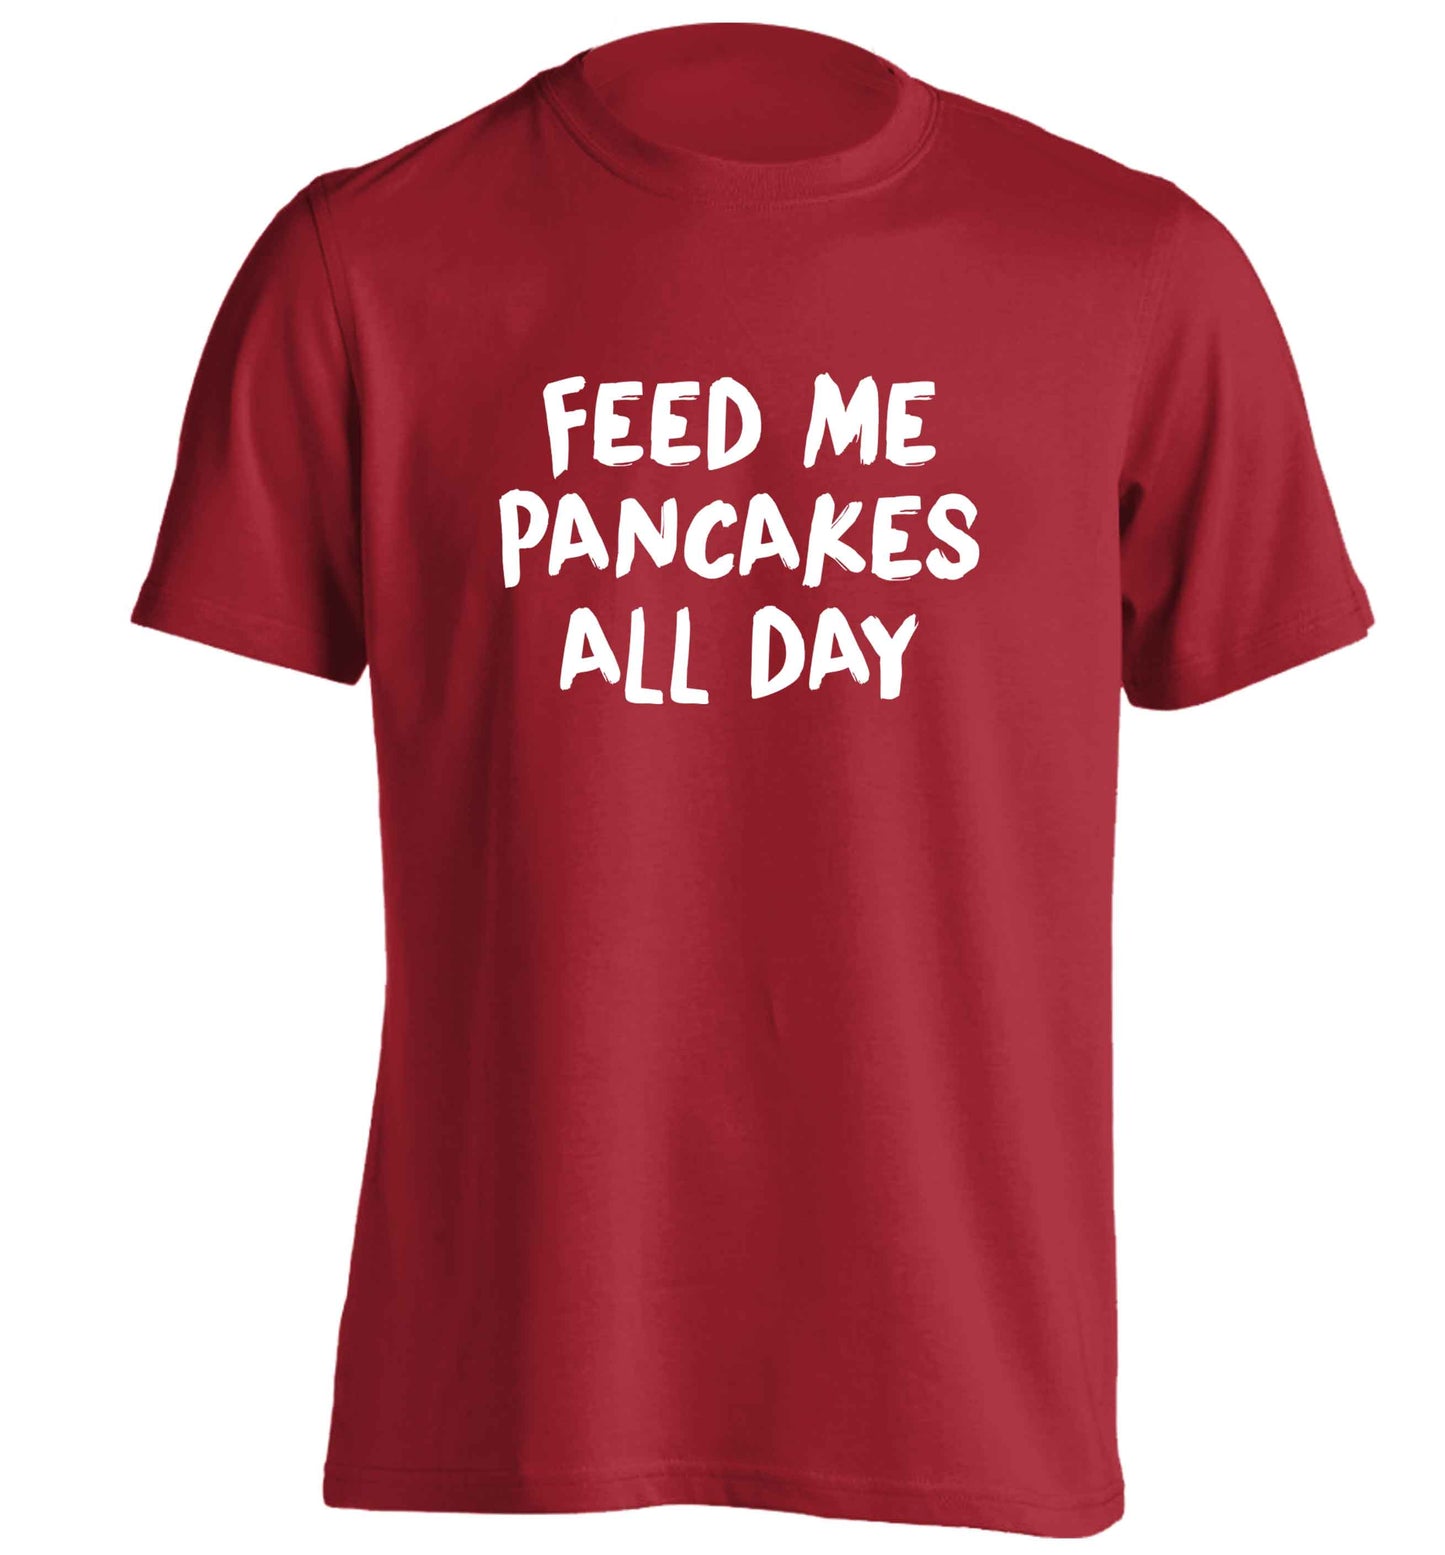 Feed me pancakes all day adults unisex red Tshirt 2XL